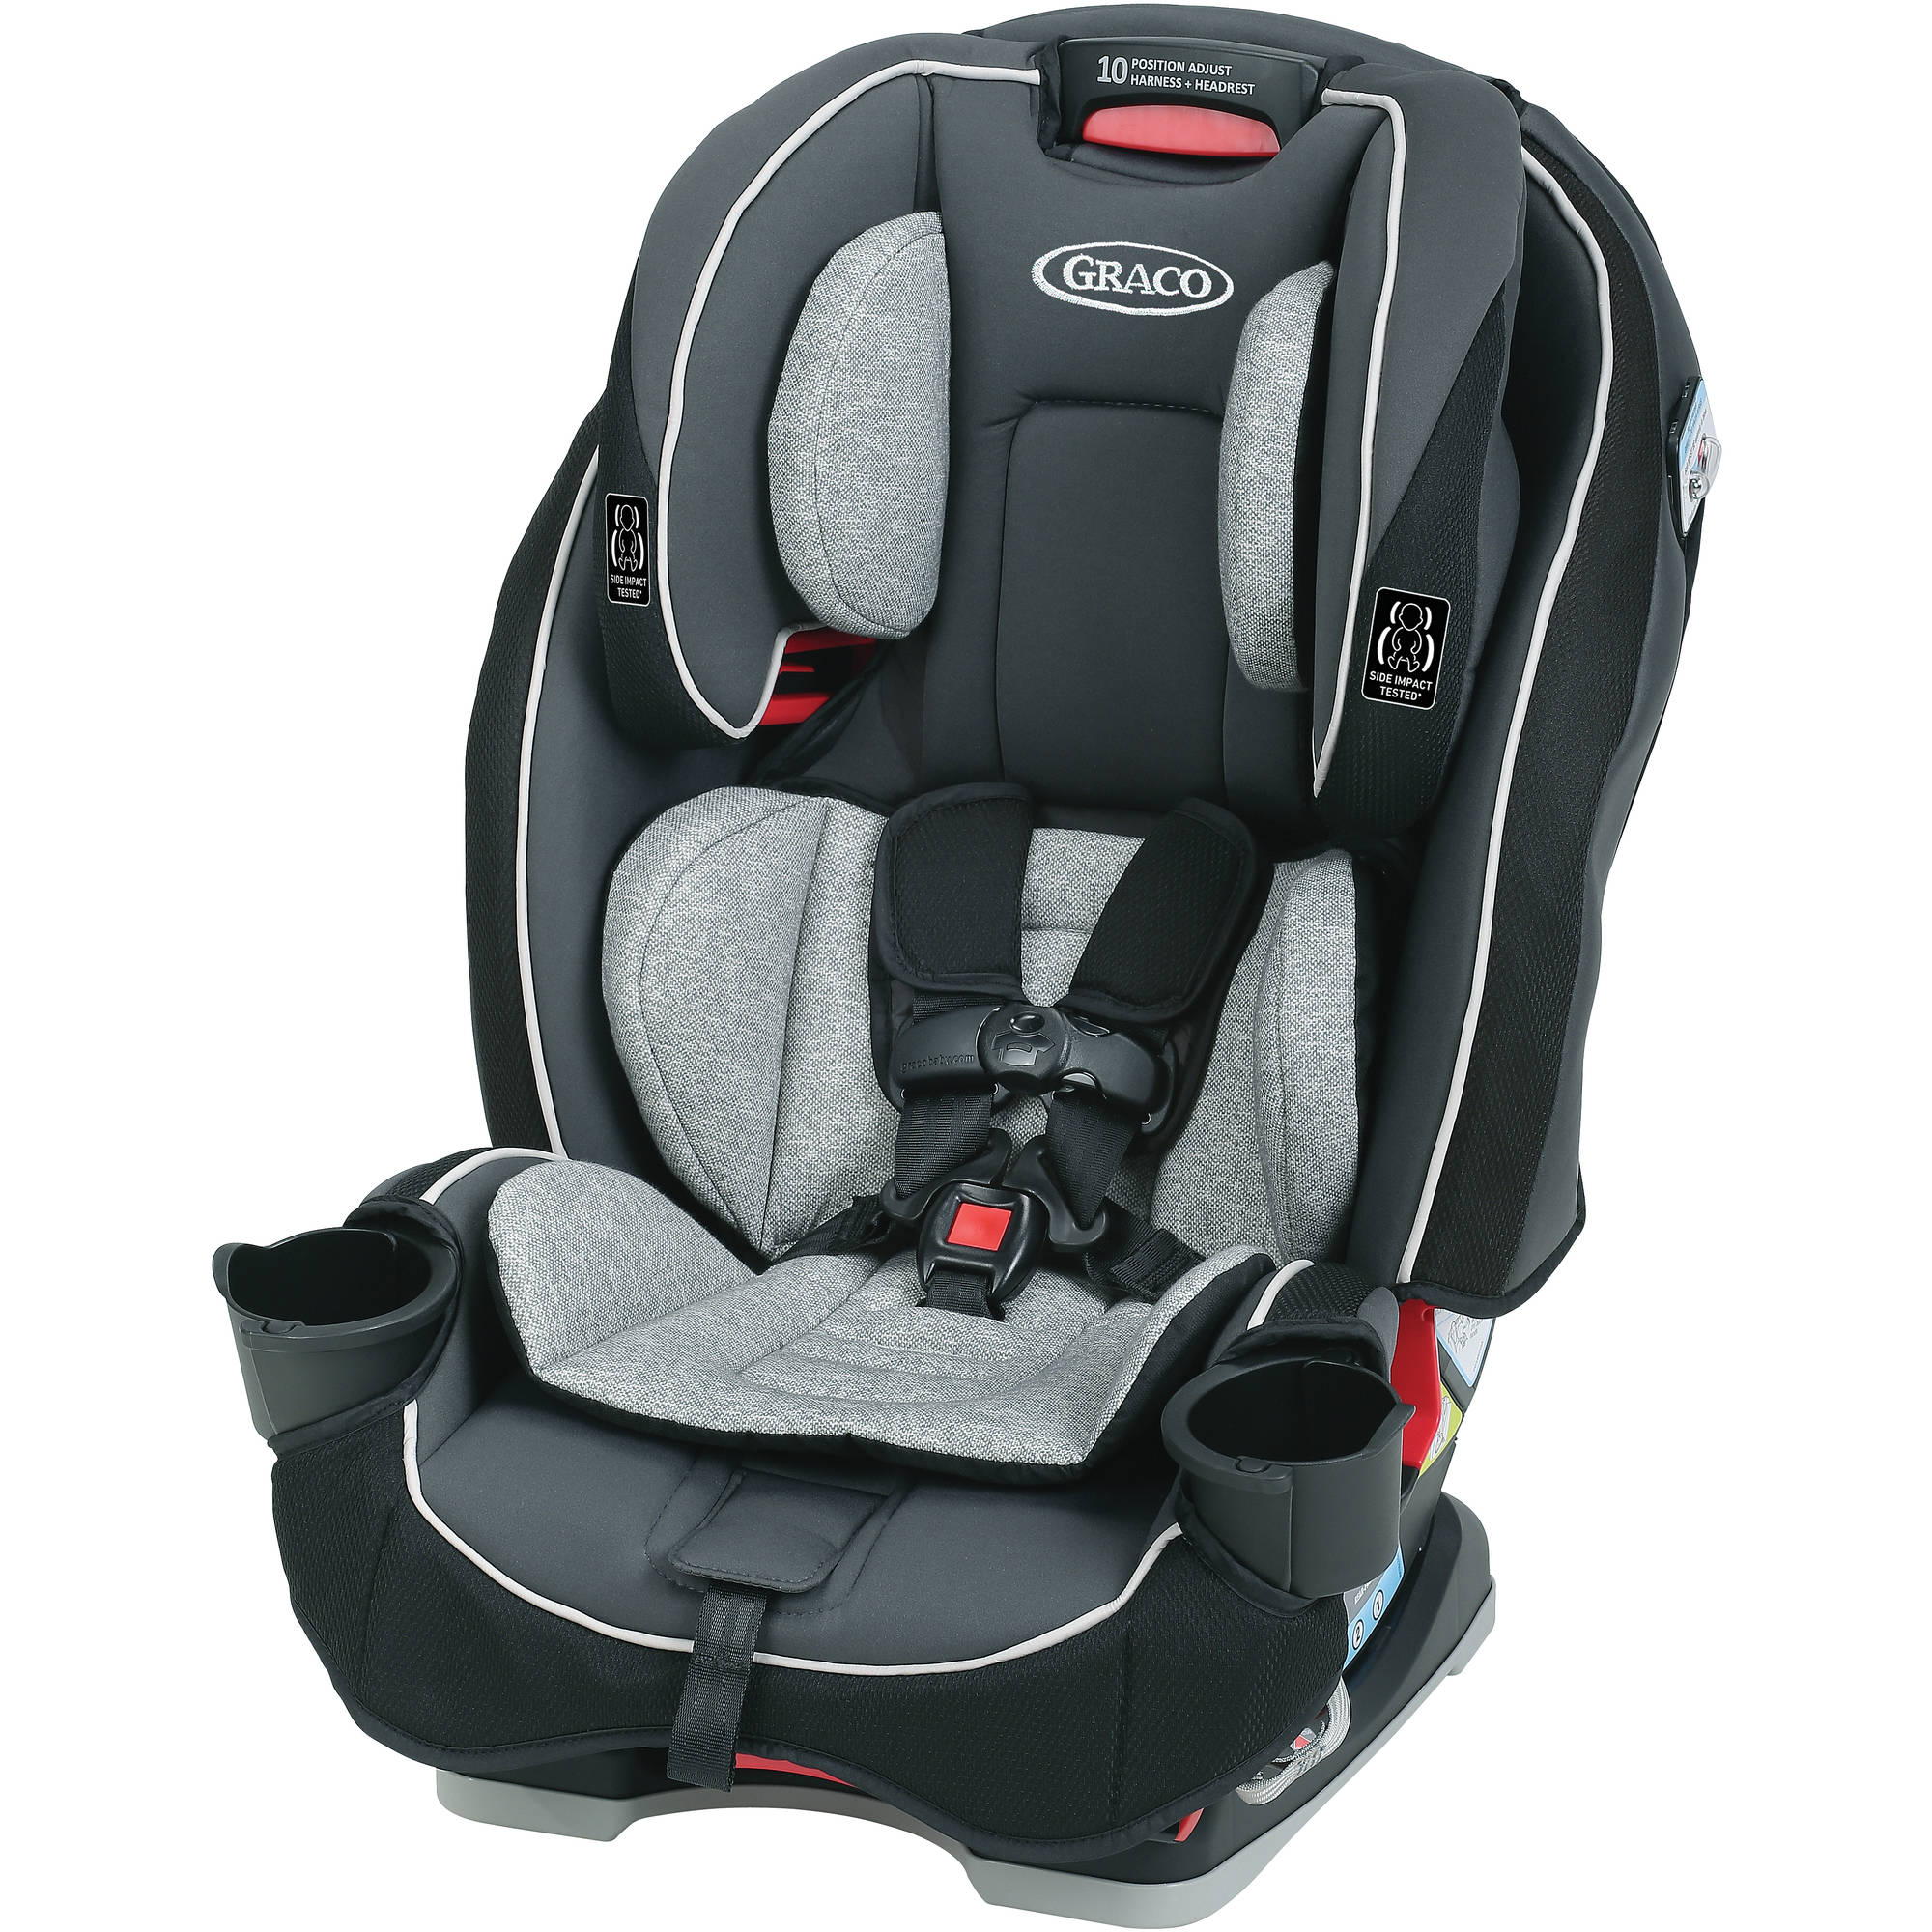 Graco SlimFit All-in-One Convertible Car Seat, Darcie - image 1 of 8